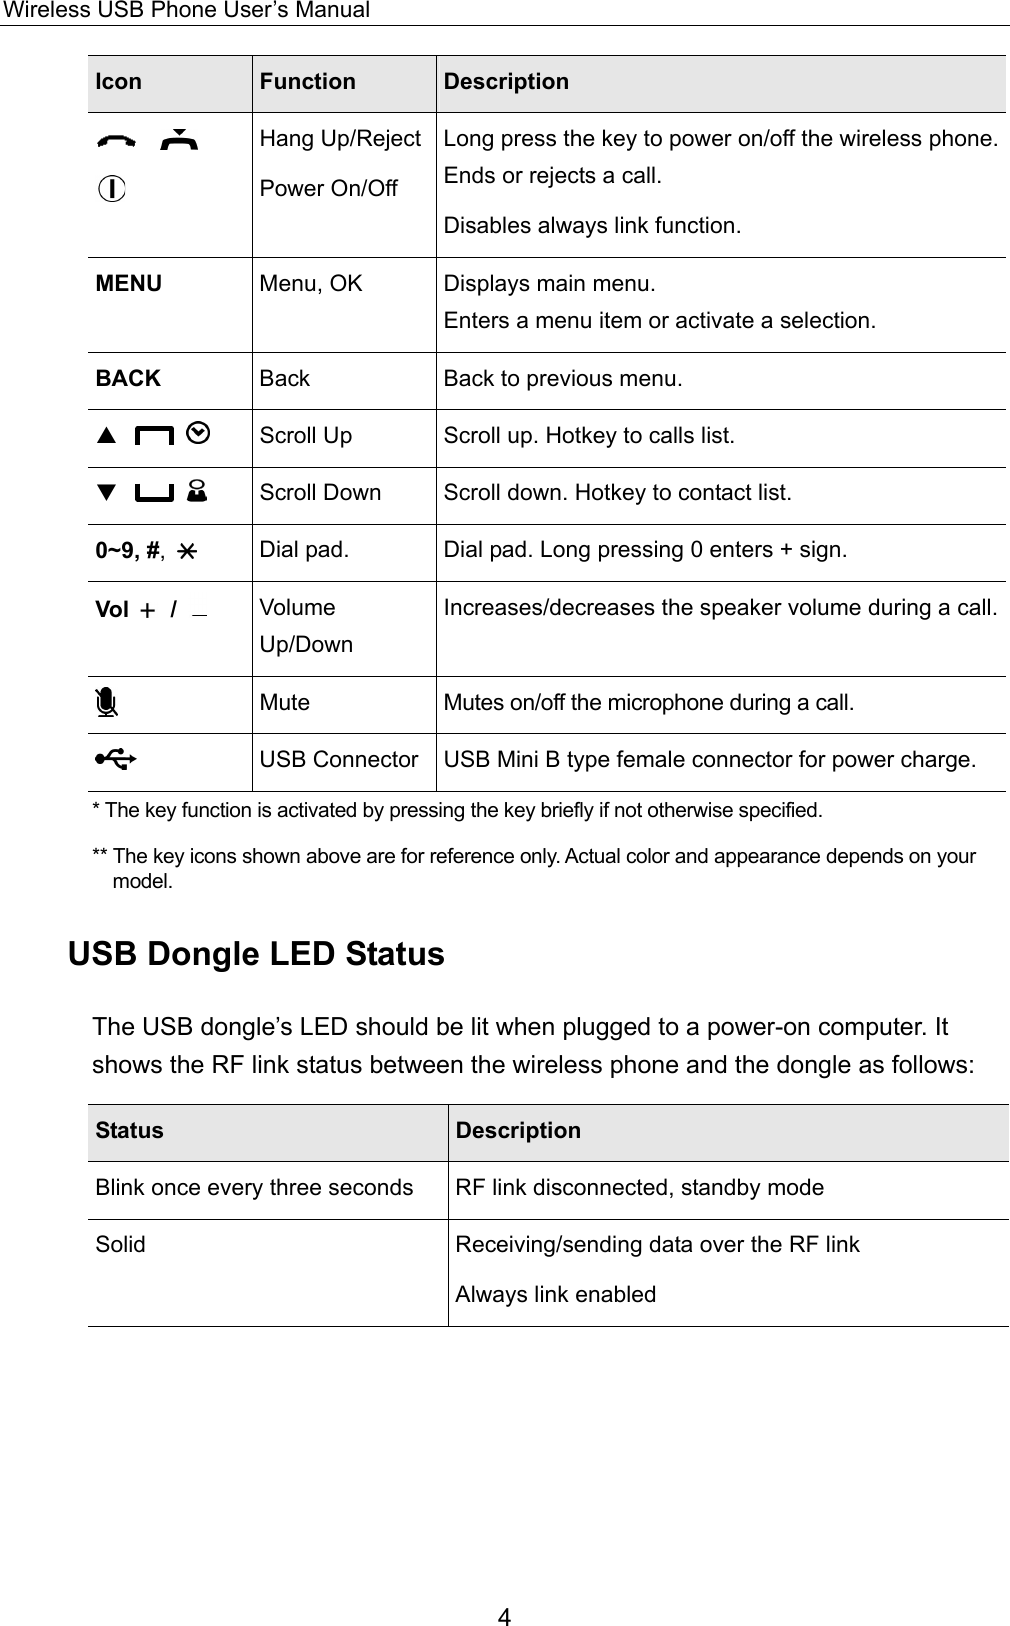 Wireless USB Phone User’s Manual Icon  Function  Description      Hang Up/RejectPower On/Off Long press the key to power on/off the wireless phone.Ends or rejects a call.   Disables always link function. MENU  Menu, OK  Displays main menu.   Enters a menu item or activate a selection. BACK  Back  Back to previous menu. S        Scroll Up  Scroll up. Hotkey to calls list. T        Scroll Down  Scroll down. Hotkey to contact list. 0~9, #,   Dial pad.  Dial pad. Long pressing 0 enters + sign. Vol   /   Volume Up/Down Increases/decreases the speaker volume during a call. Mute  Mutes on/off the microphone during a call.  USB Connector USB Mini B type female connector for power charge. * The key function is activated by pressing the key briefly if not otherwise specified.   ** The key icons shown above are for reference only. Actual color and appearance depends on your model. USB Dongle LED Status The USB dongle’s LED should be lit when plugged to a power-on computer. It shows the RF link status between the wireless phone and the dongle as follows:   Status  Description Blink once every three seconds  RF link disconnected, standby mode Solid  Receiving/sending data over the RF link Always link enabled   4 